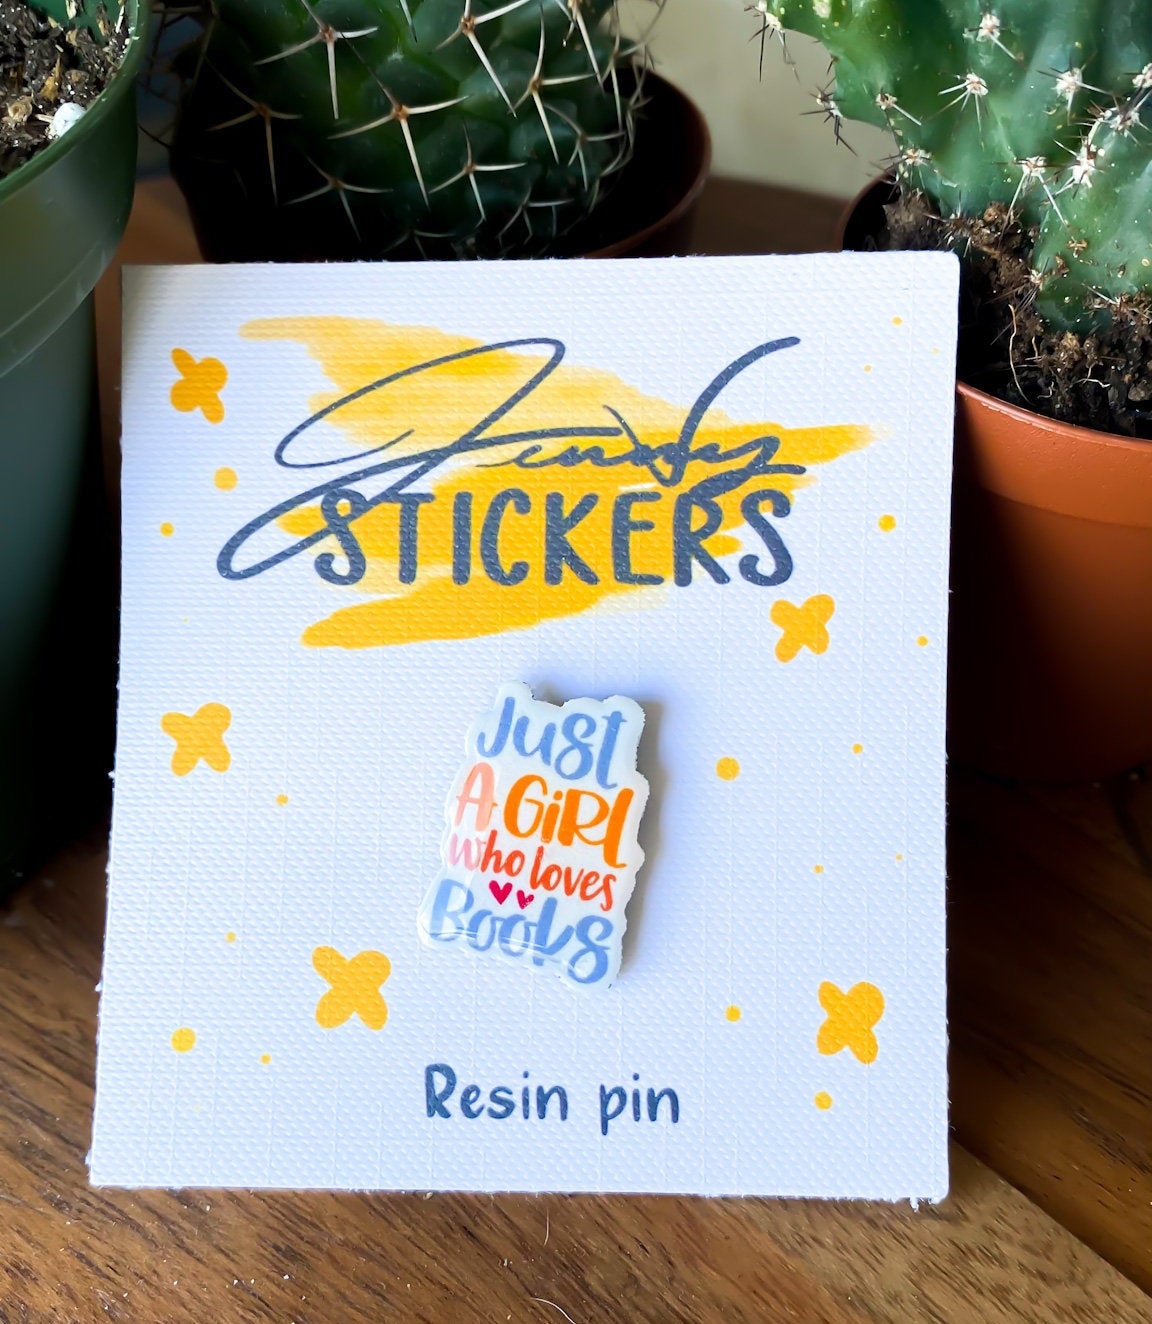 Pin on Gifts to Buy for Friends